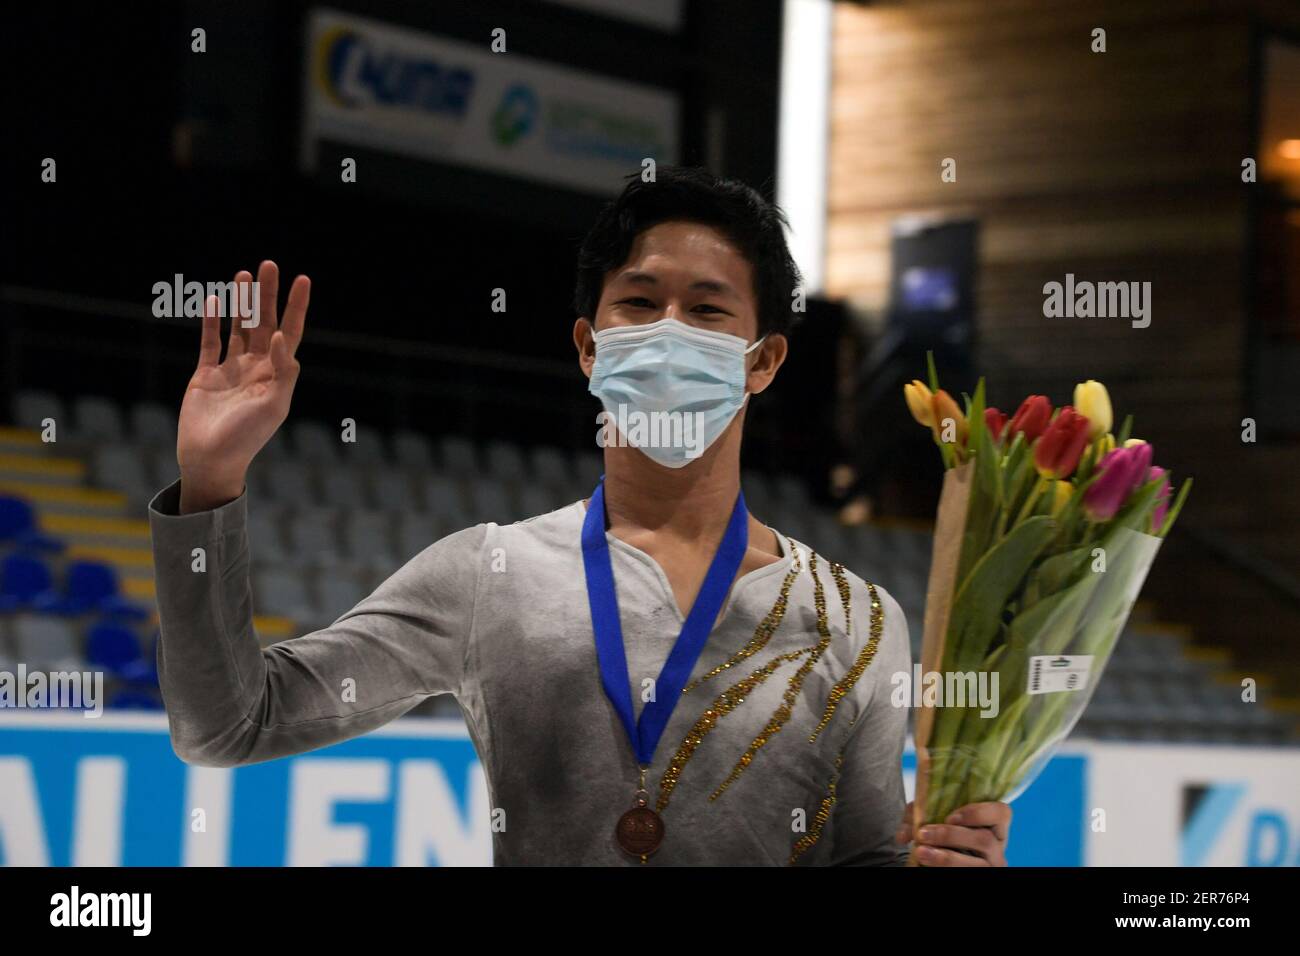 THE HAGUE, NETHERLANDS - FEBRUARY 28: Adam Siao Him Fa of France during the victory ceremony for the figure skating men's free skate program on Day 4 Stock Photo